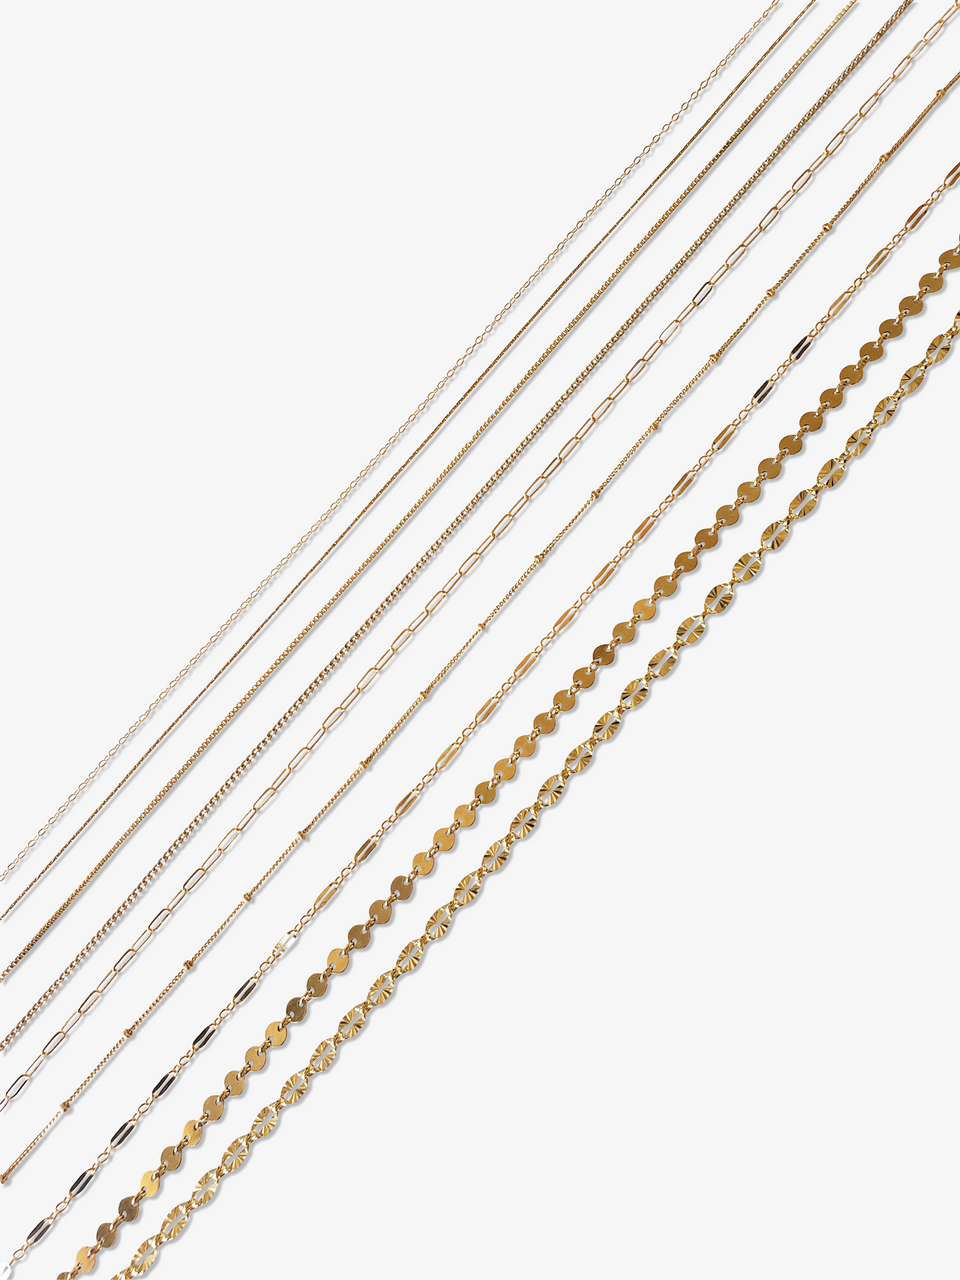 2x1mm 14k Gold Filled Chain Wholesale by Foot, Unfinished Gold Filled  Dainty Cable Chain Bulk, Gold Chain for Jewelry Making. 10681HR 